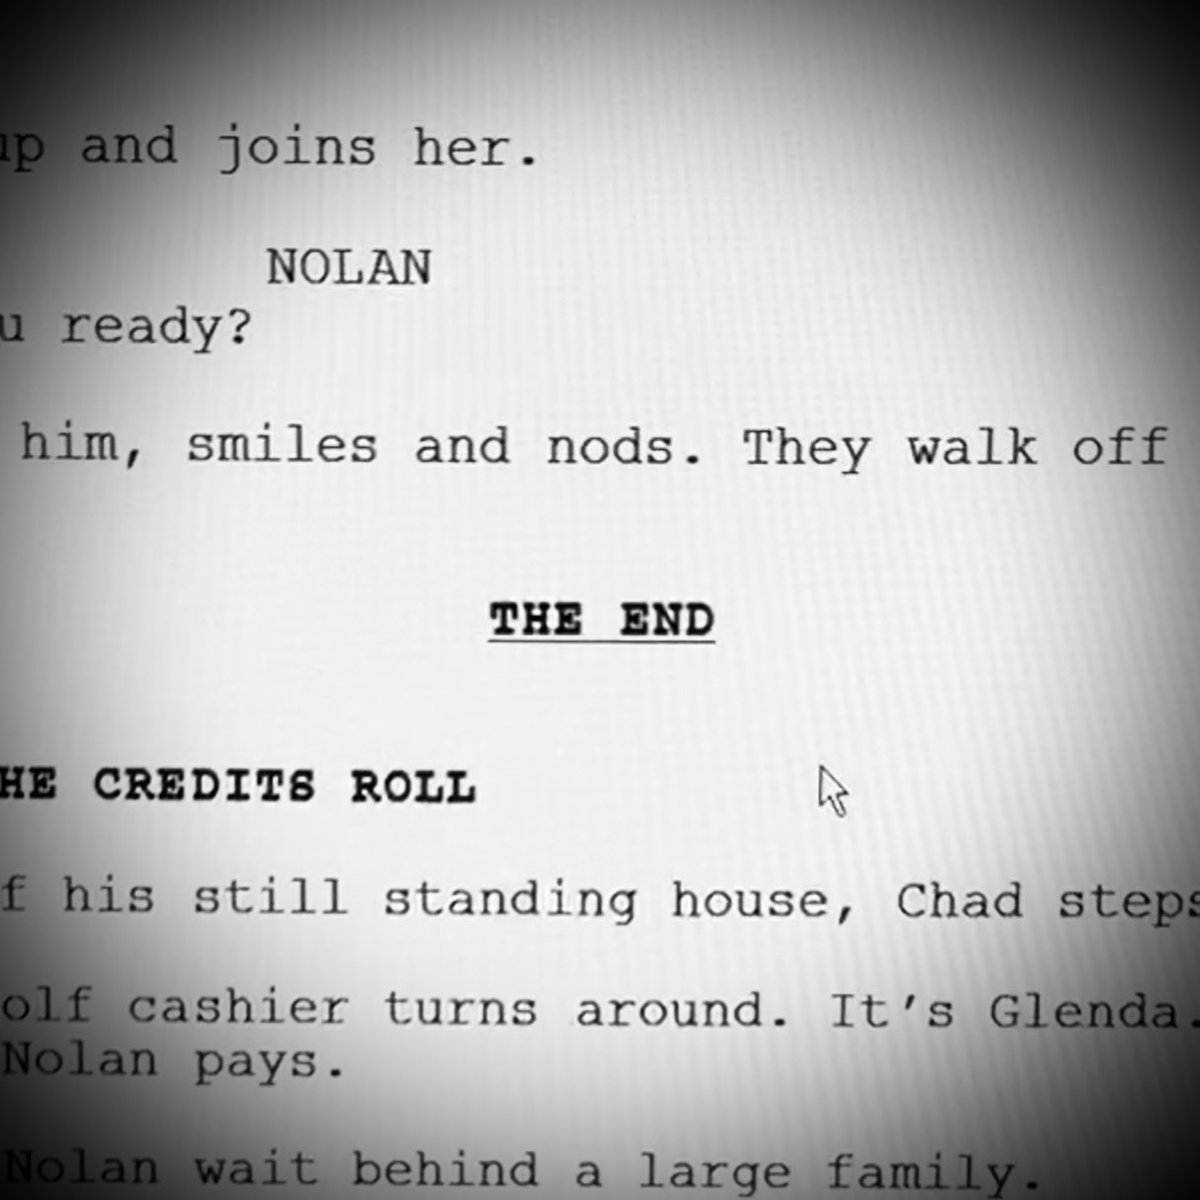 Super pumped to have typed THE END on the first draft of my #fantasy #romcom today, one day before my deadline! #nanowrimo #screenwriting #screenwriter #ScreenwritingTwitter #roadmapwritersTT